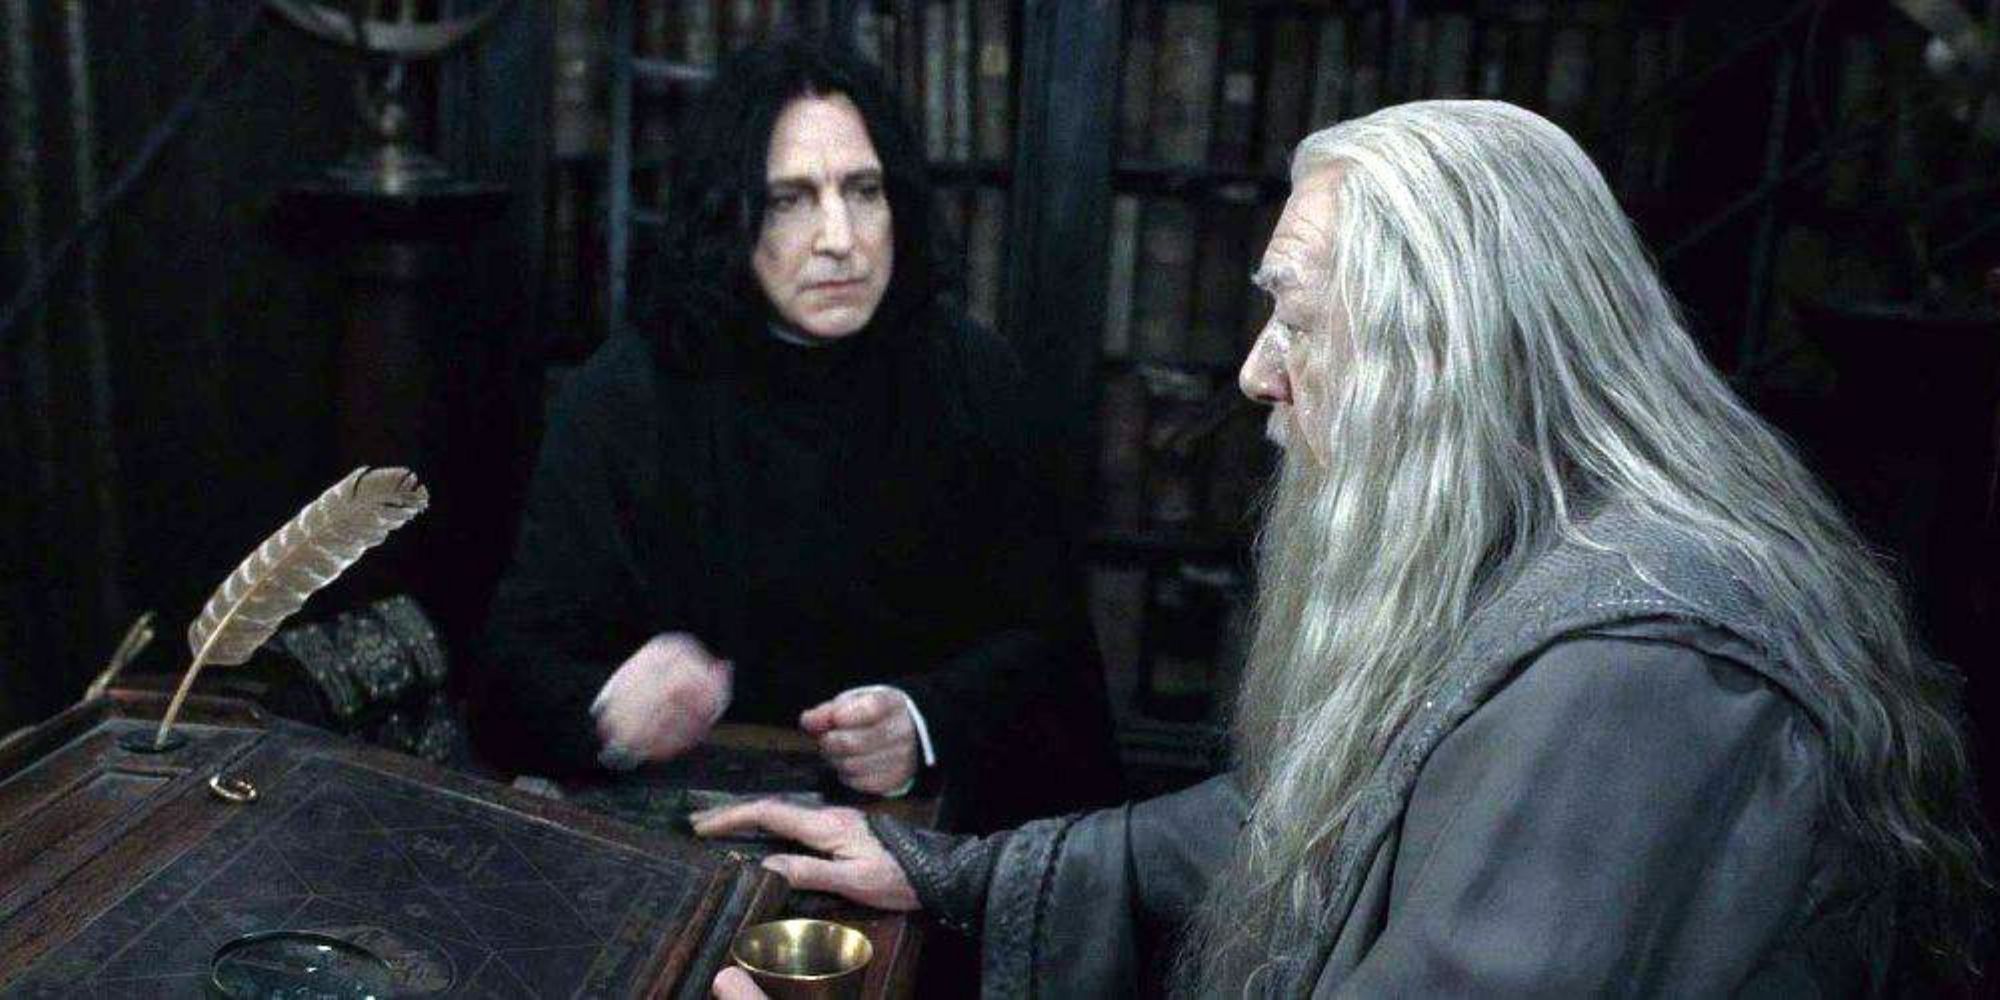 Snape and Dumbledore in the headmaster's office in the Harry Potter franchise